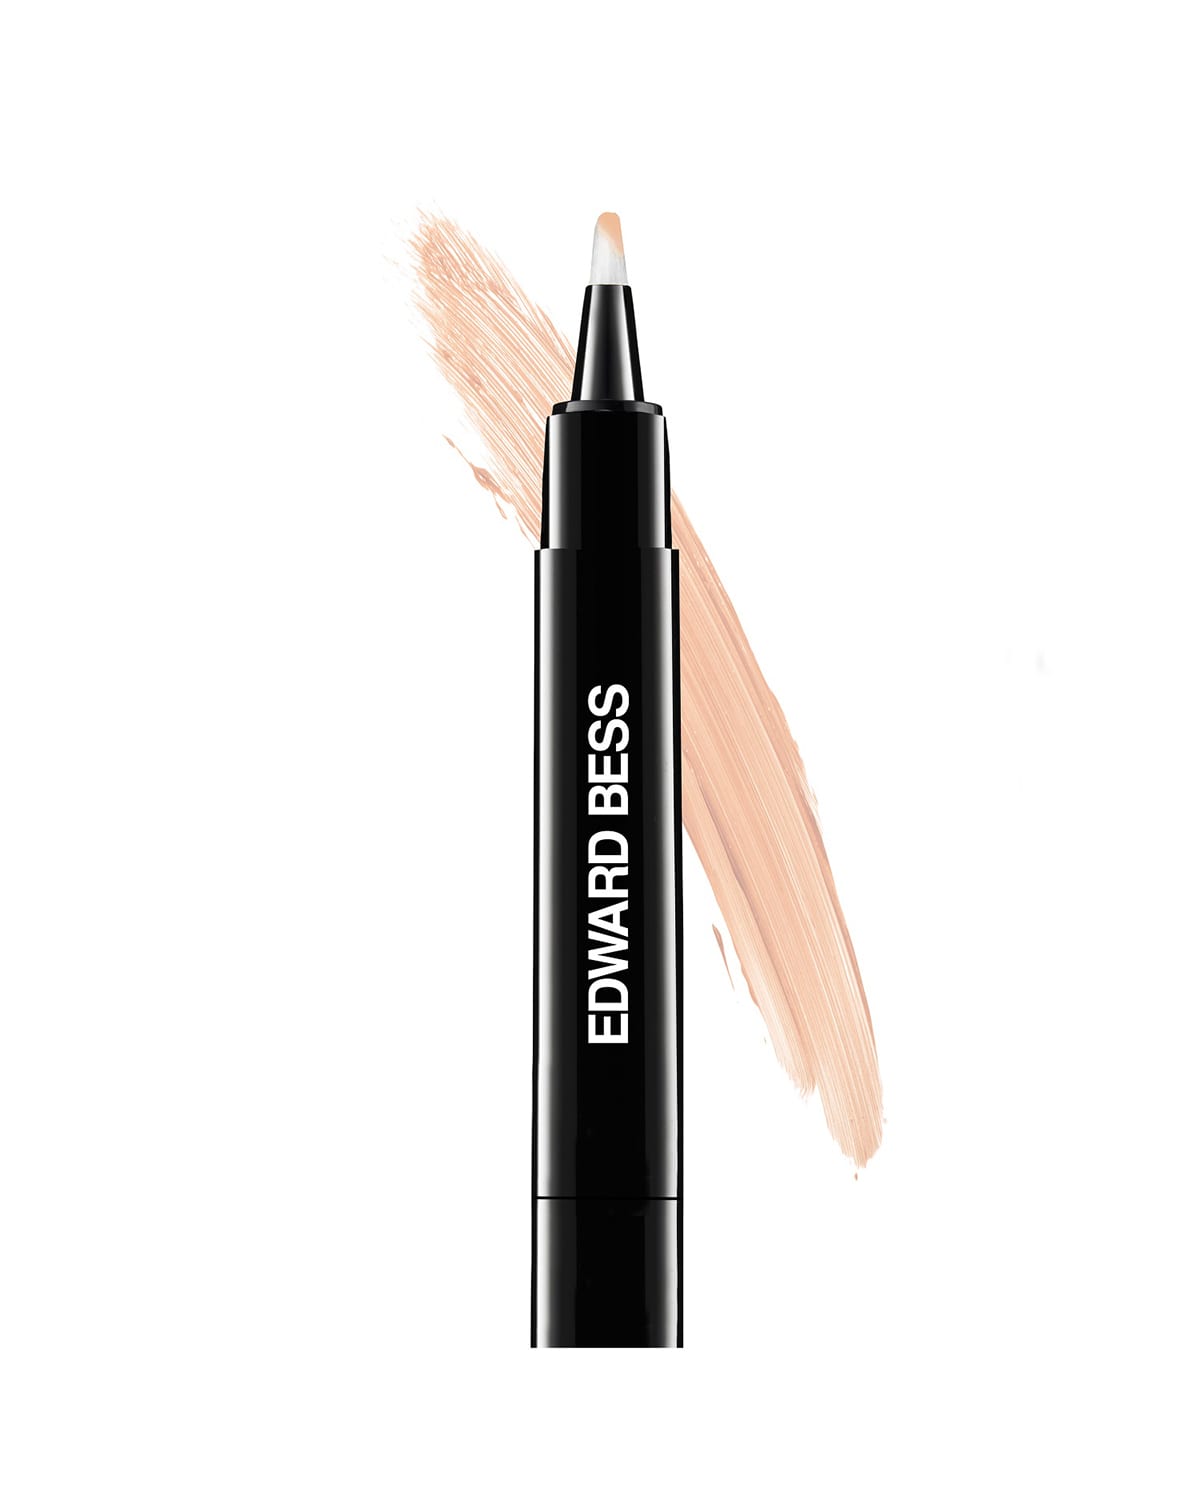 Edward Bess Total Correction Under-eye Perfection Concealer In White